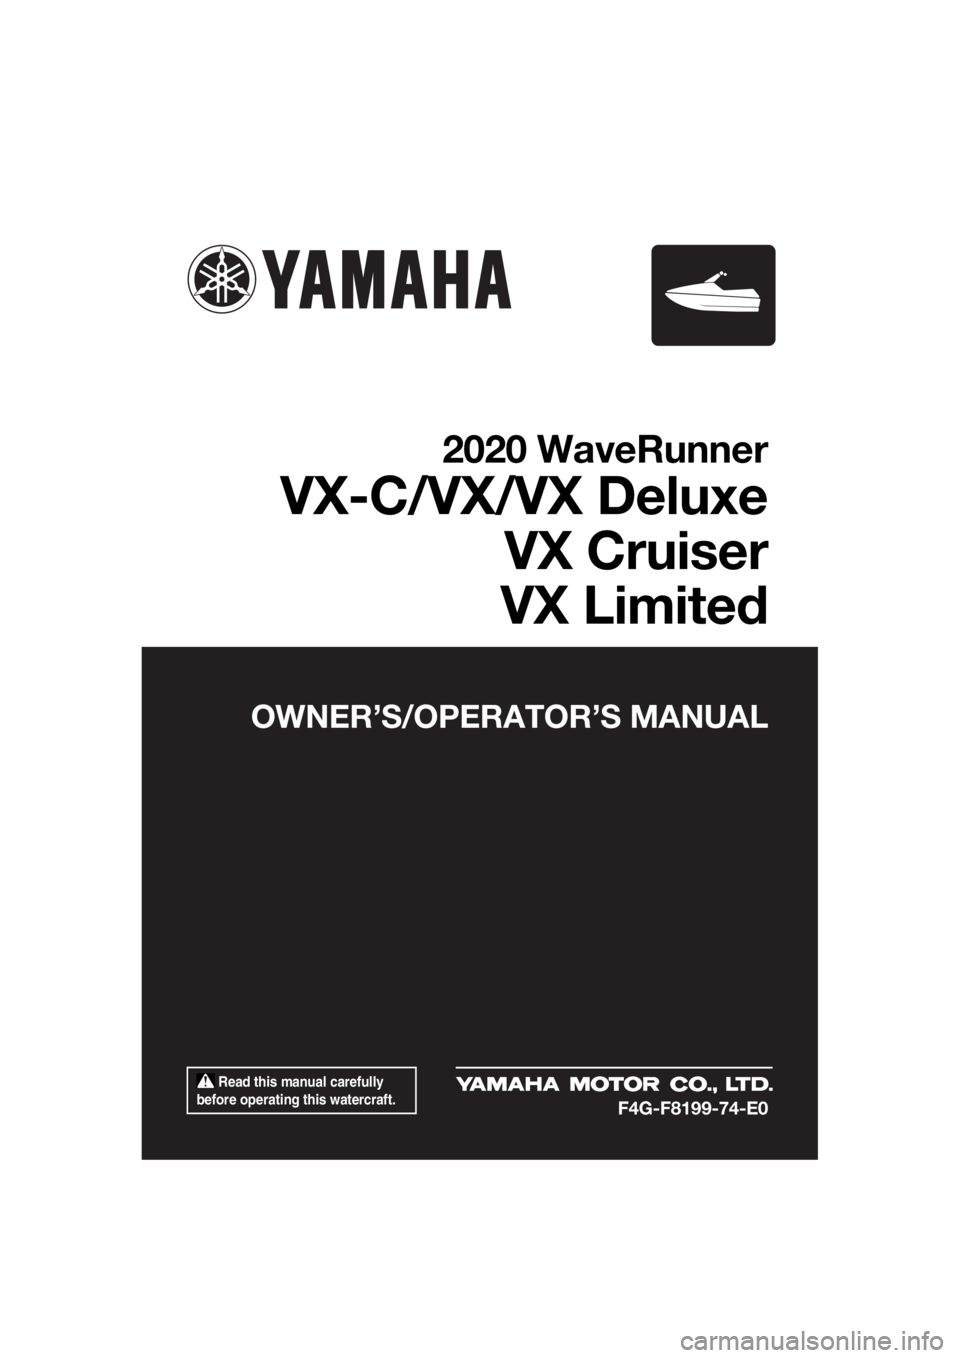 YAMAHA VX LIMITED 2020  Owners Manual  Read this manual carefully 
before operating this watercraft.
OWNER’S/OPERATOR’S MANUAL
2020 WaveRunner
VX-C/VX/VX Deluxe
VX Cruiser
VX Limited
F4G-F8199-74-E0
UF4G74E0.book  Page 1  Tuesday, Jul